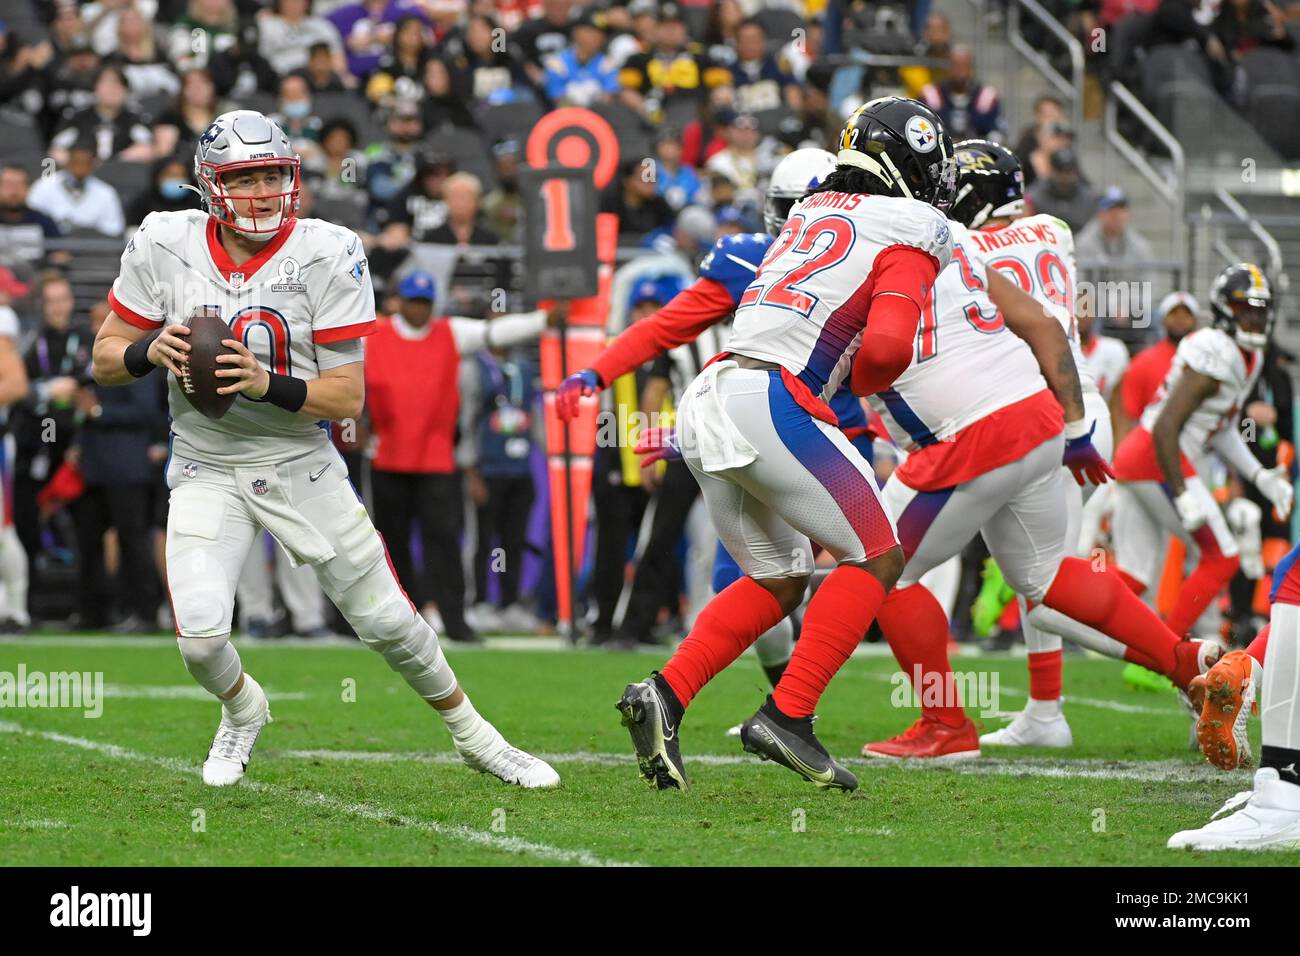 AFC quarterback Justin Herbert (10), of the Los Angeles Chargers, drops to pass against the NFC during the second half of the Pro Bowl NFL football game, Sunday, Feb